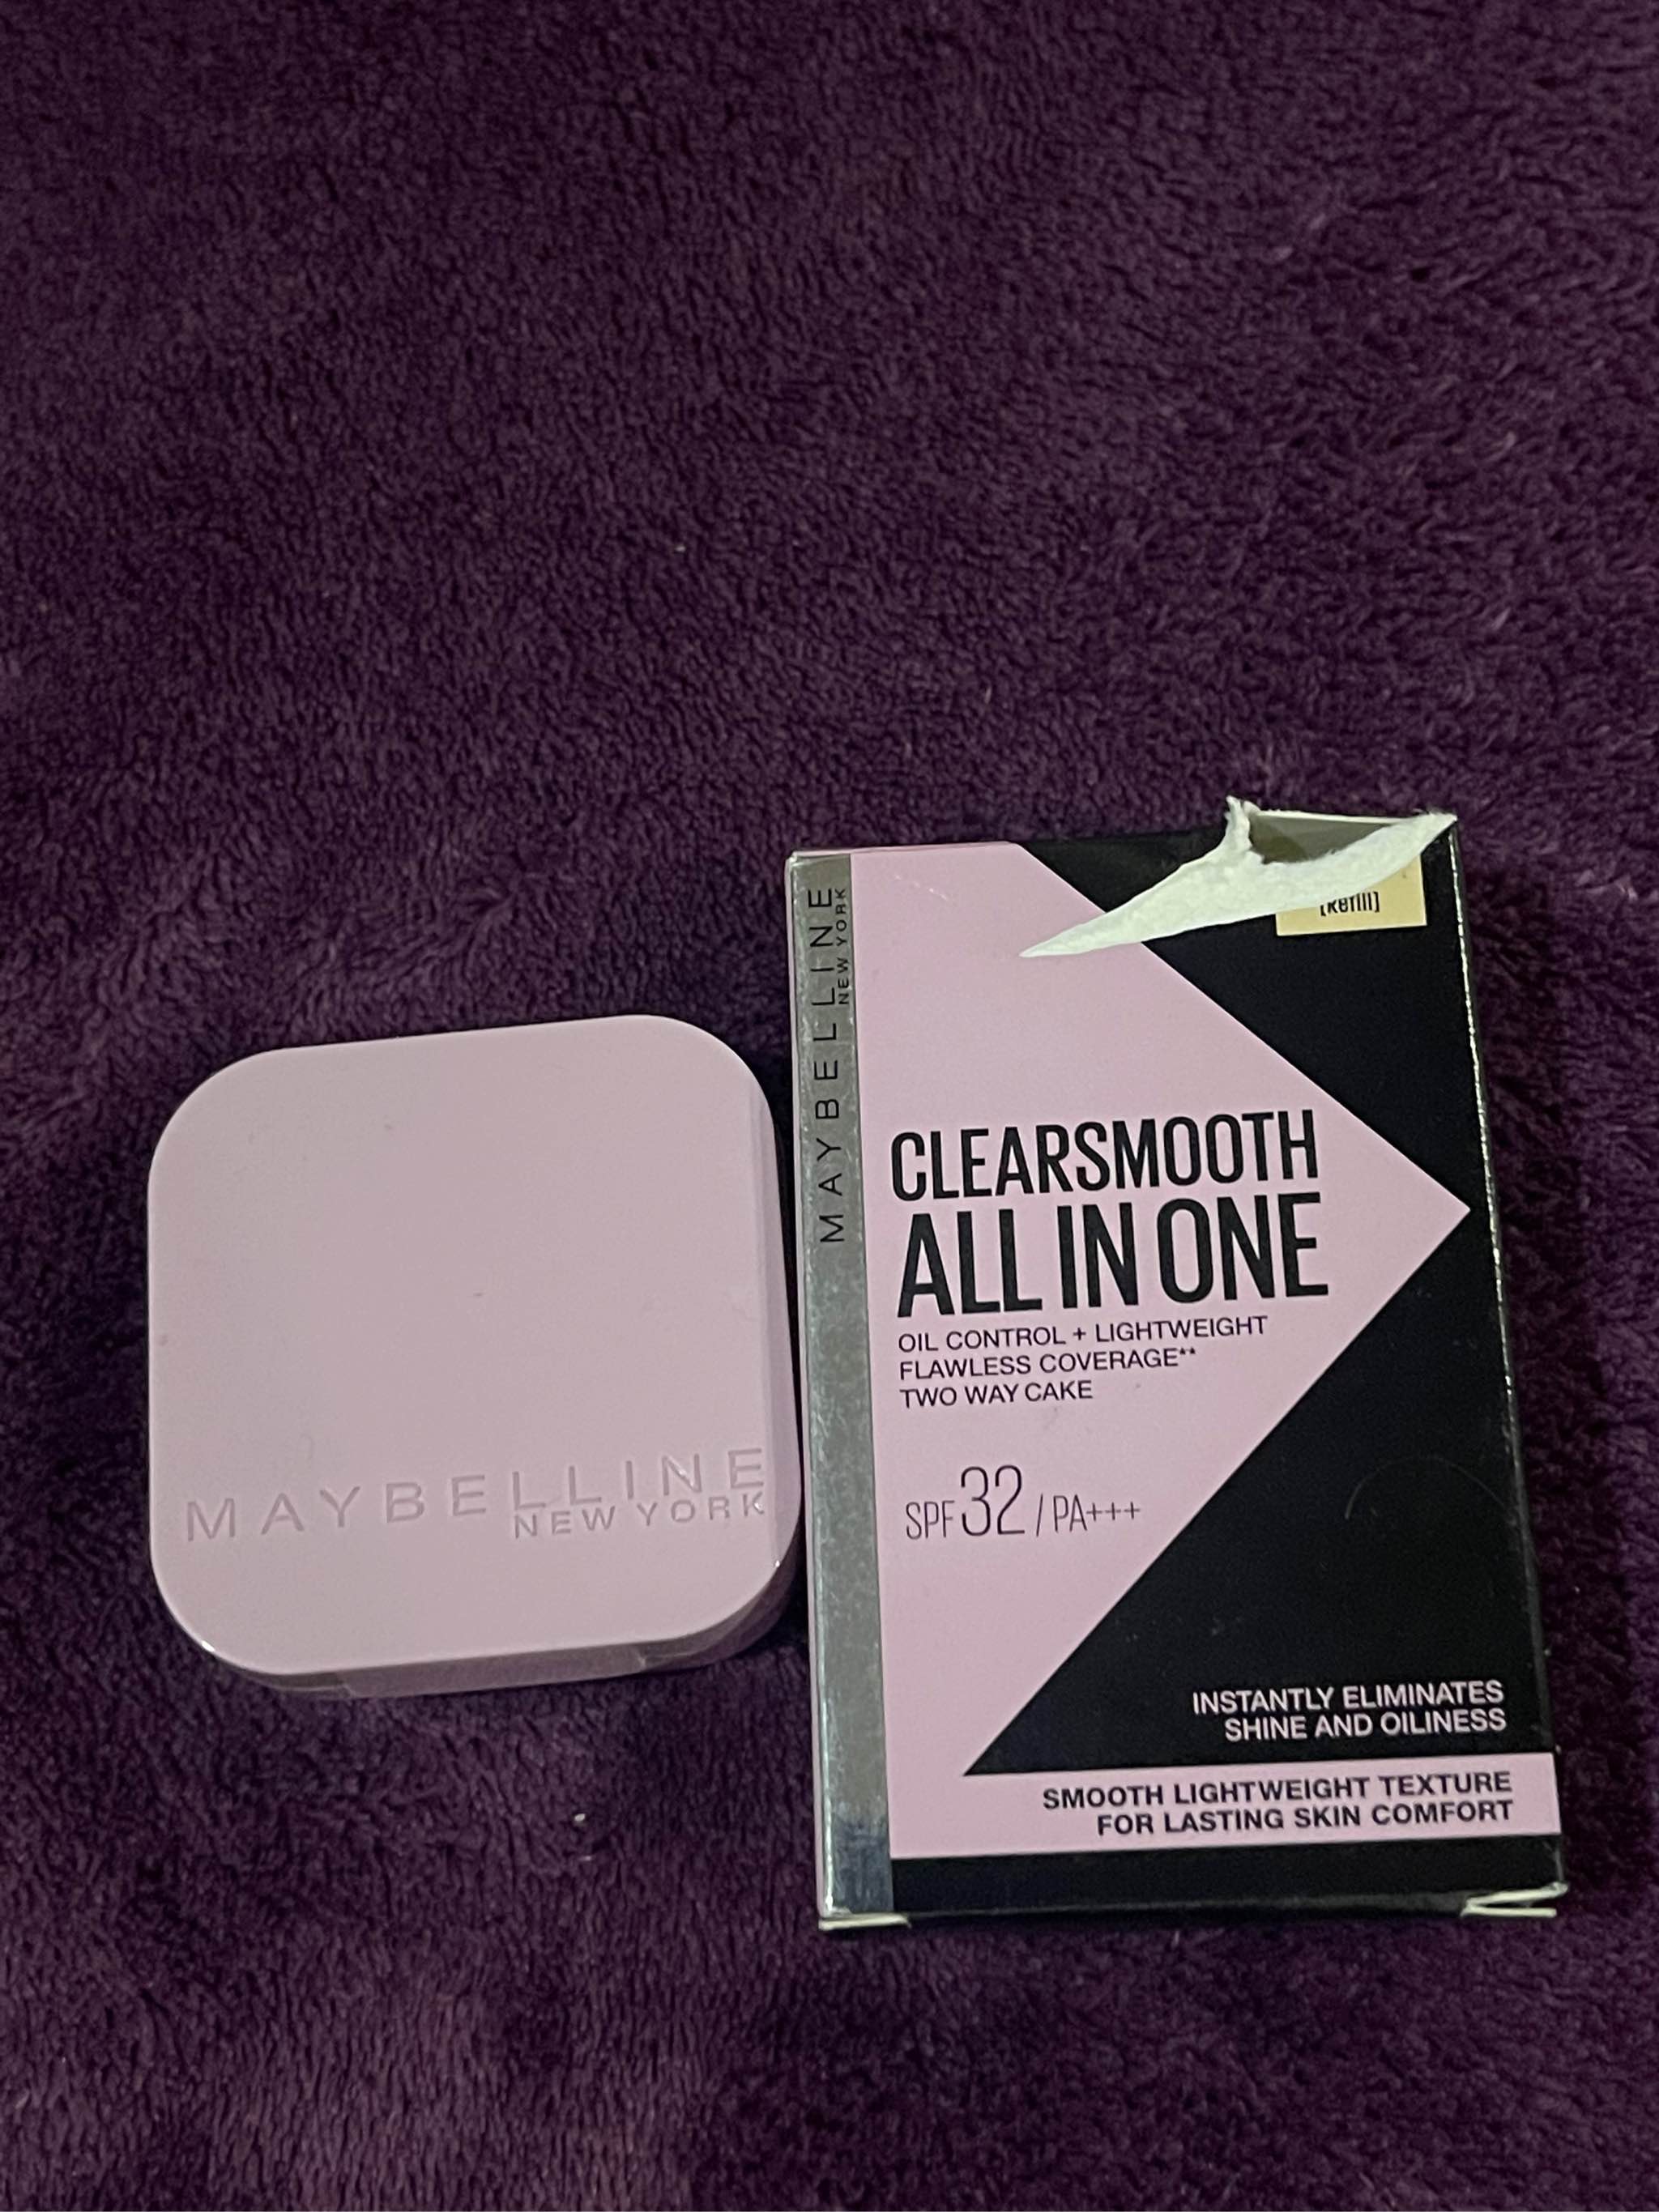 Maybelline New York Clear Smooth All In One Powder Foundation - 01